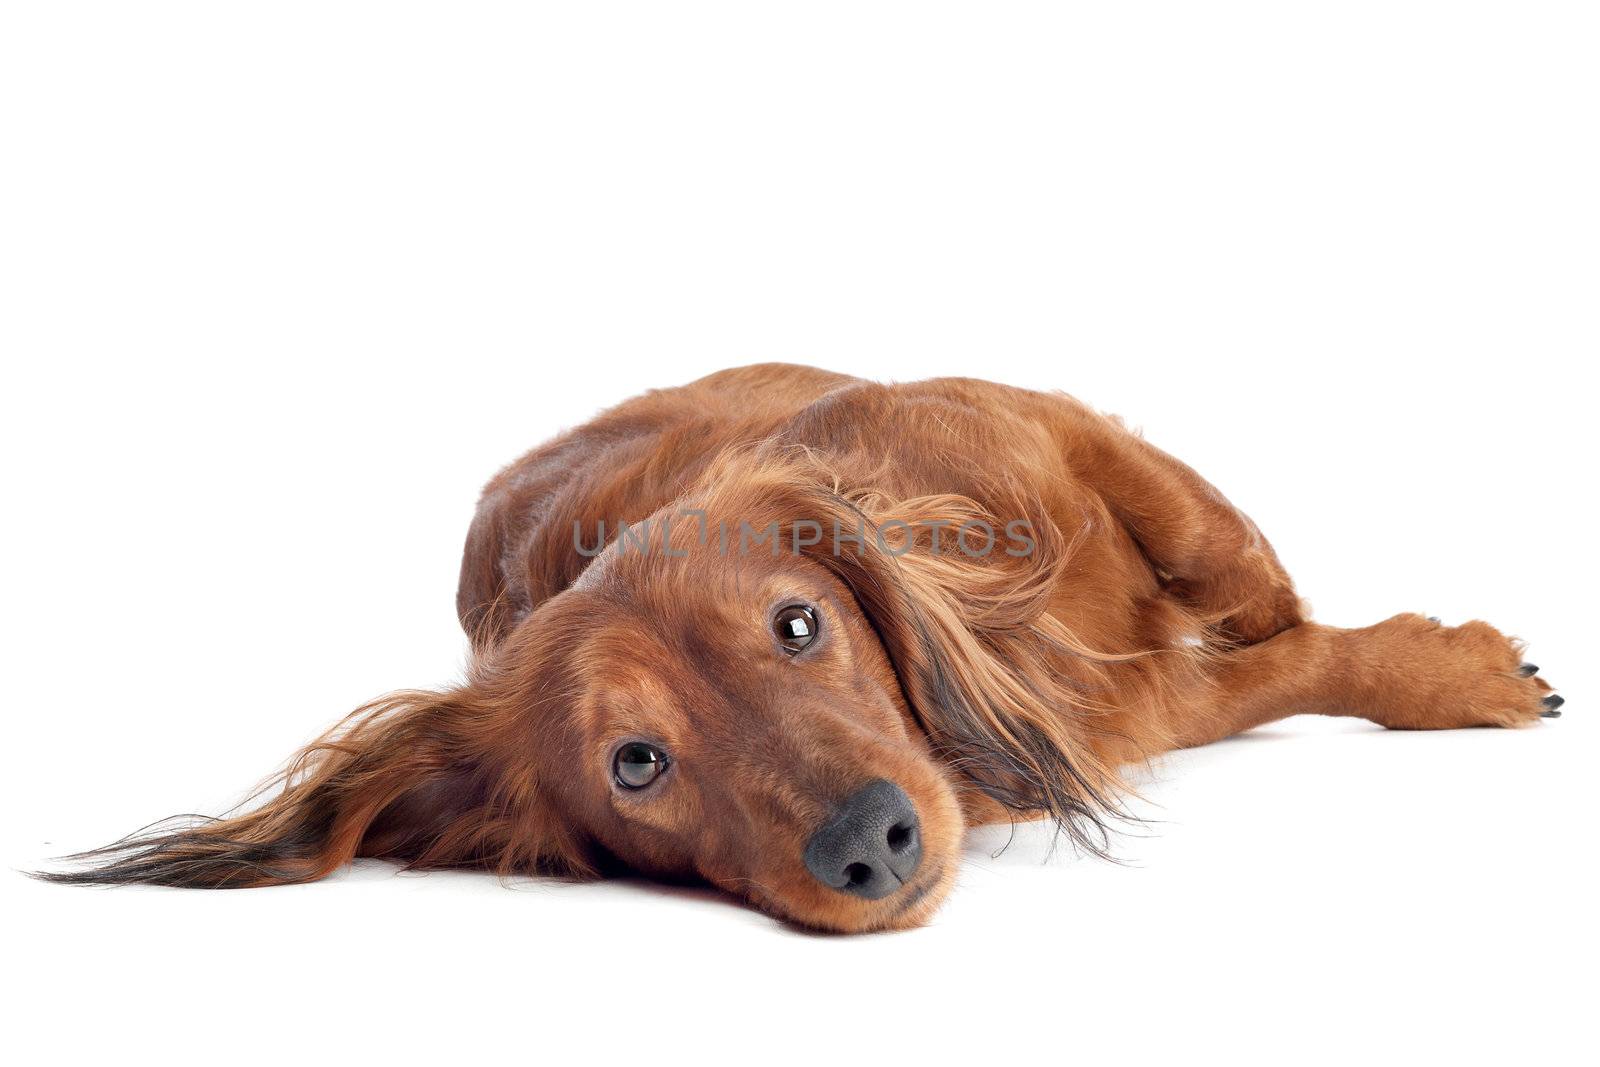 Dachshund in front of a white background by eriklam